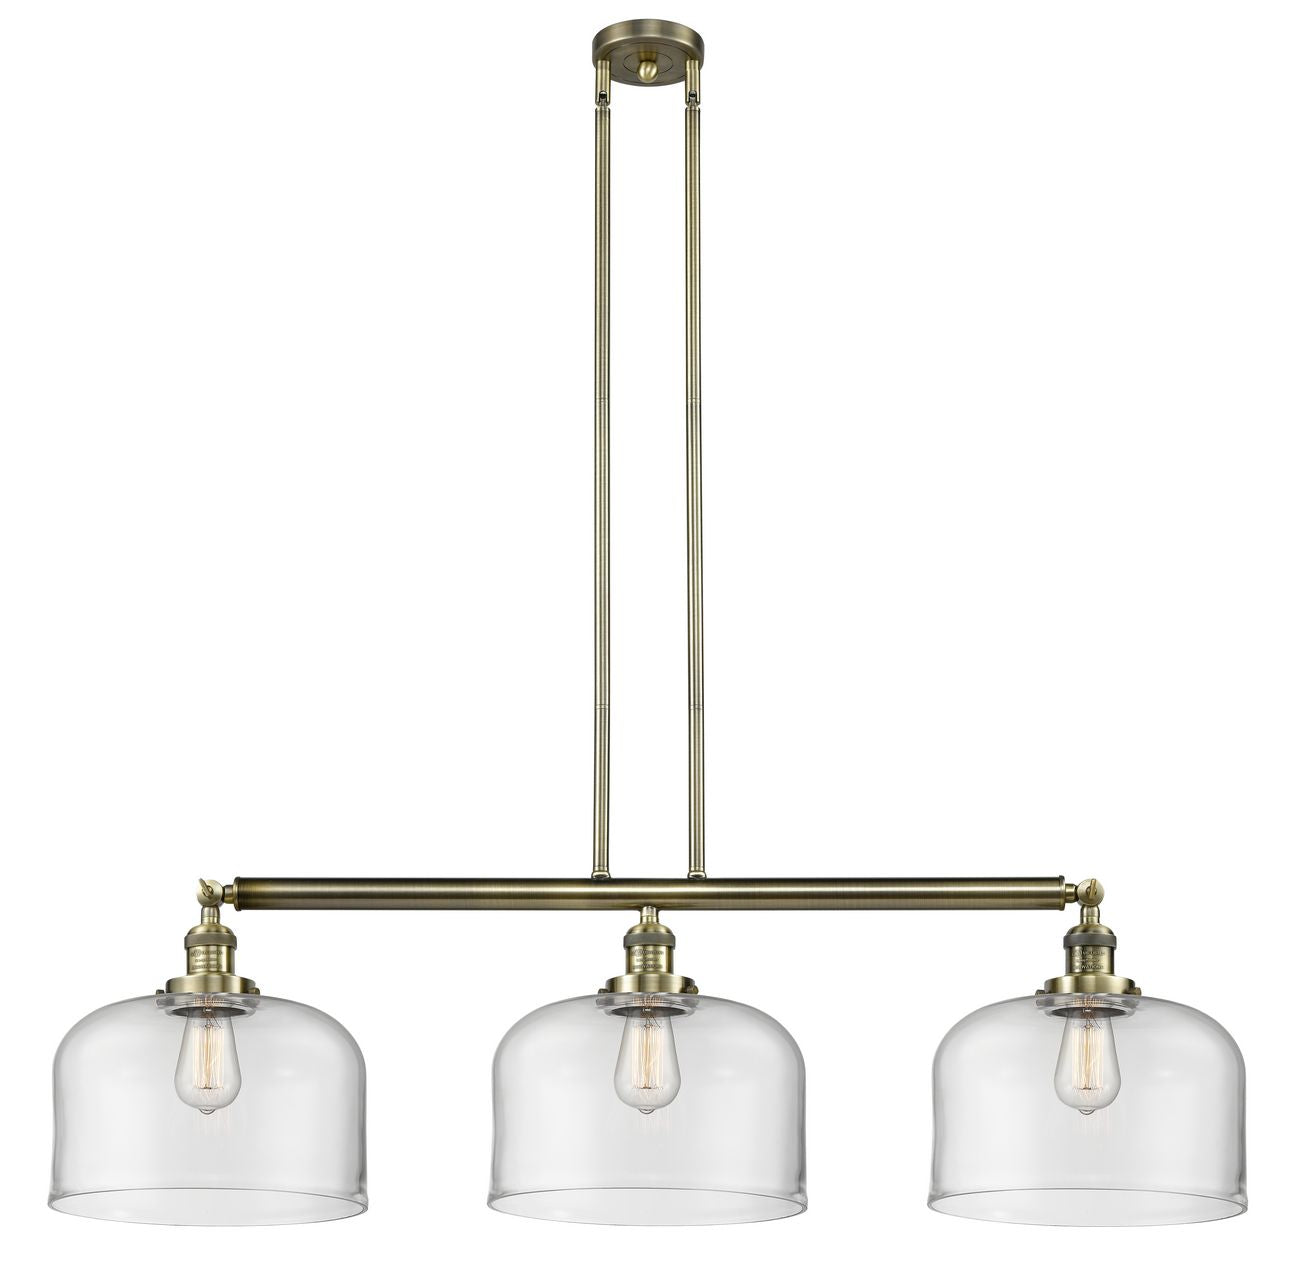 3-Light 42" X-Large Bell Island Light - Bell-Urn Clear Glass - Choice of Finish And Incandesent Or LED Bulbs